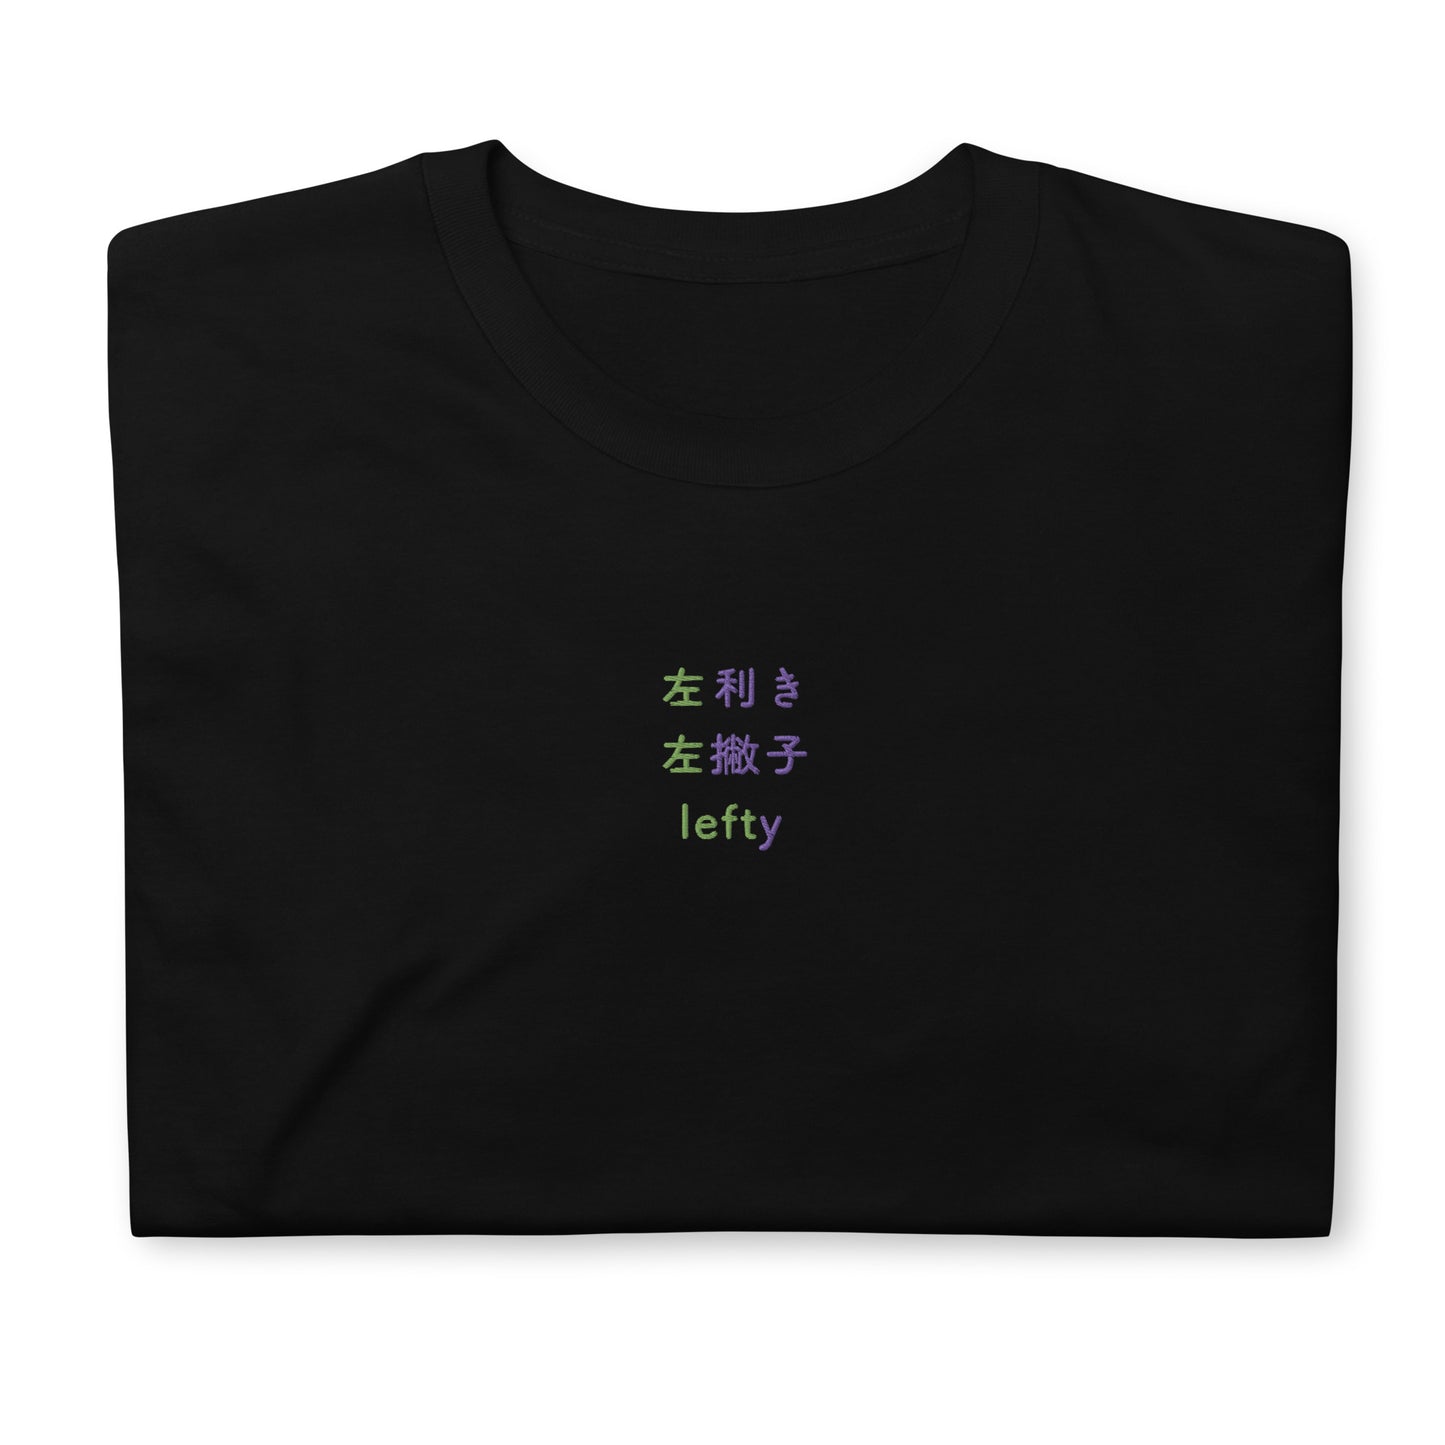 Black High Quality Tee - Front Design with an Green, Purple Embroidery "Lefty" in Japanese,Chinese and English